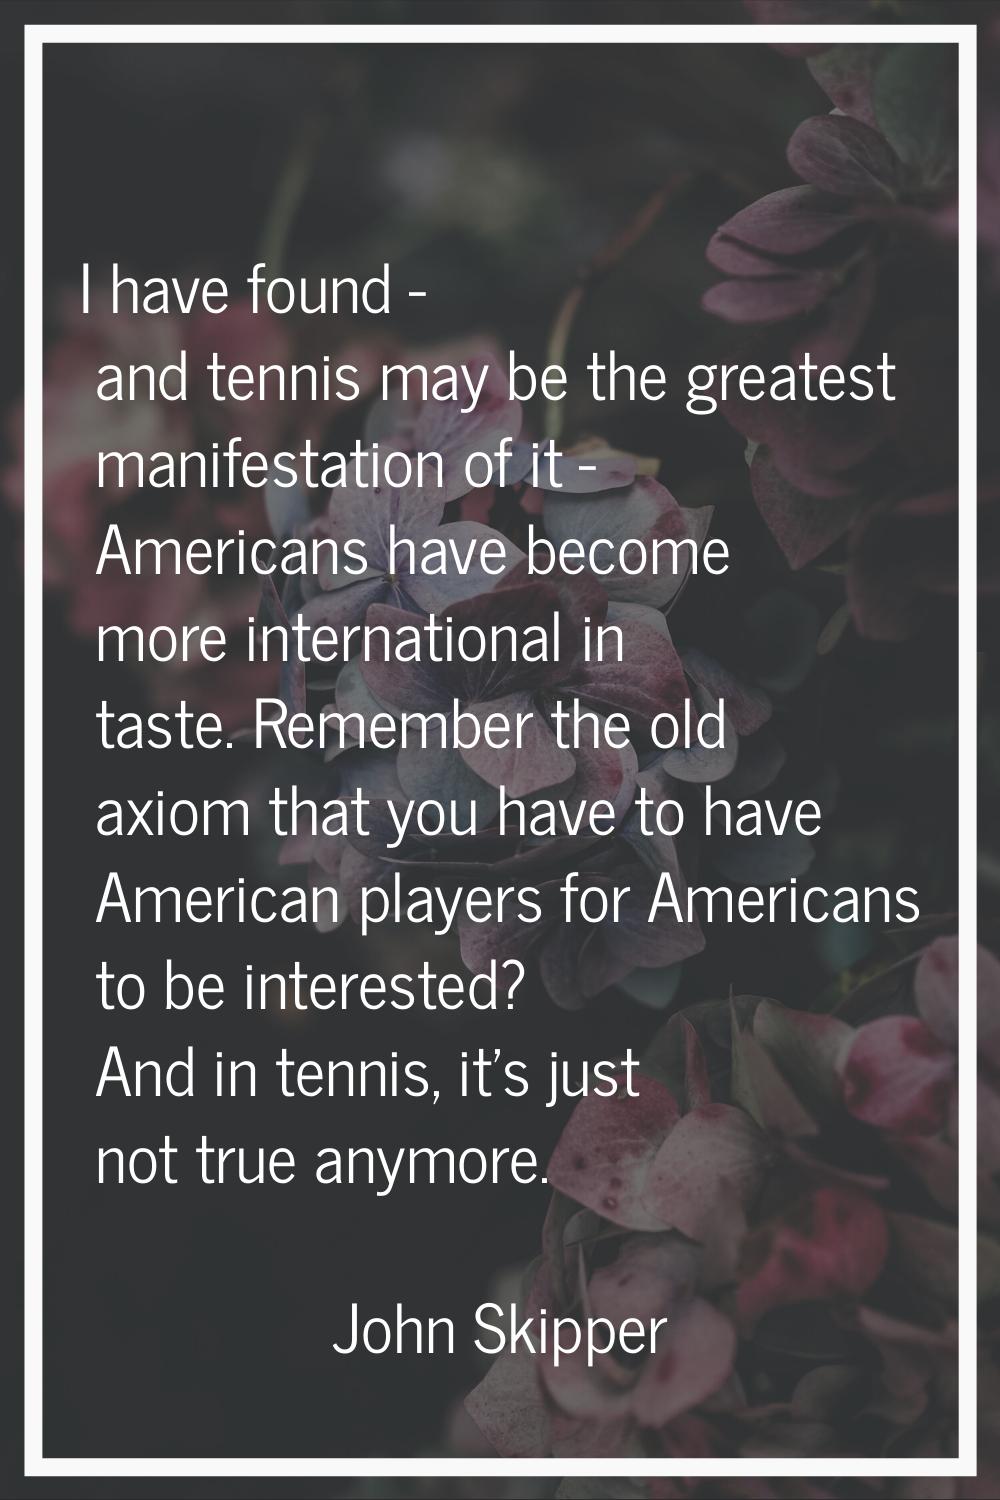 I have found - and tennis may be the greatest manifestation of it - Americans have become more inte